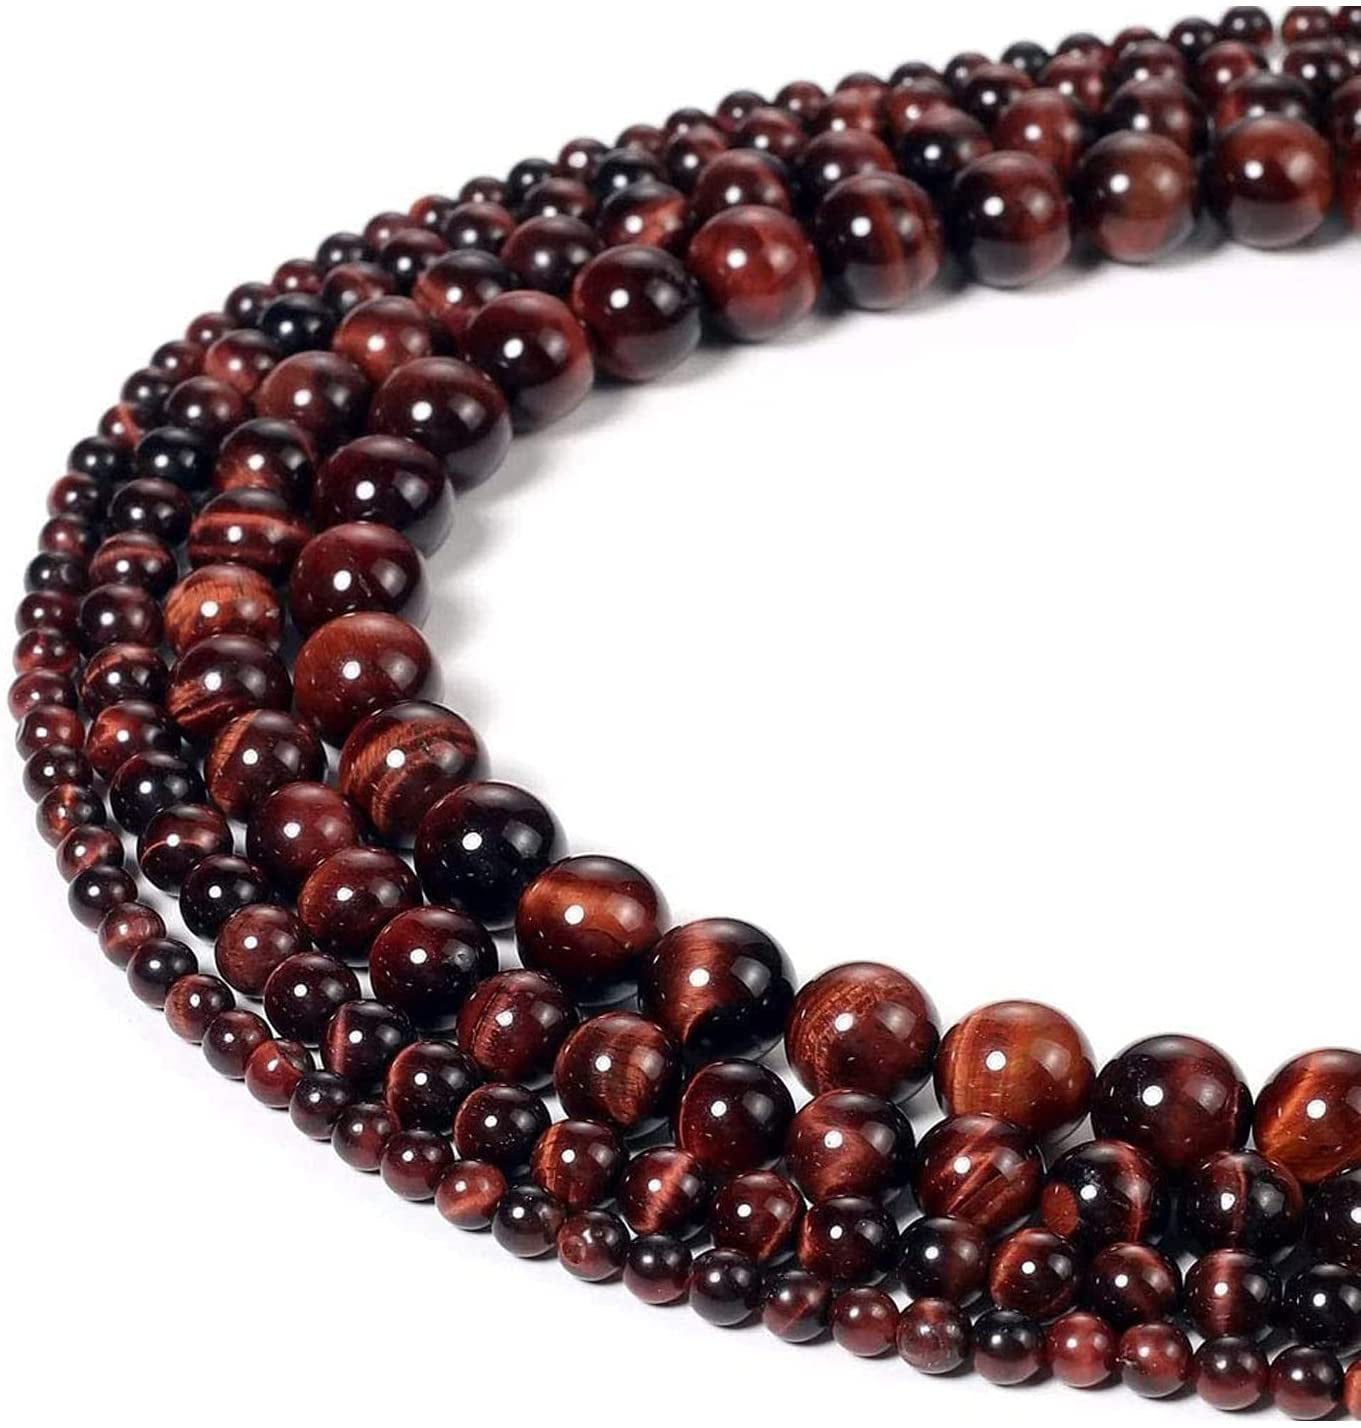 6-16mm Round Smooth Red Tiger Eye Gemstone Beads for Jewelry Making Strand 15" 